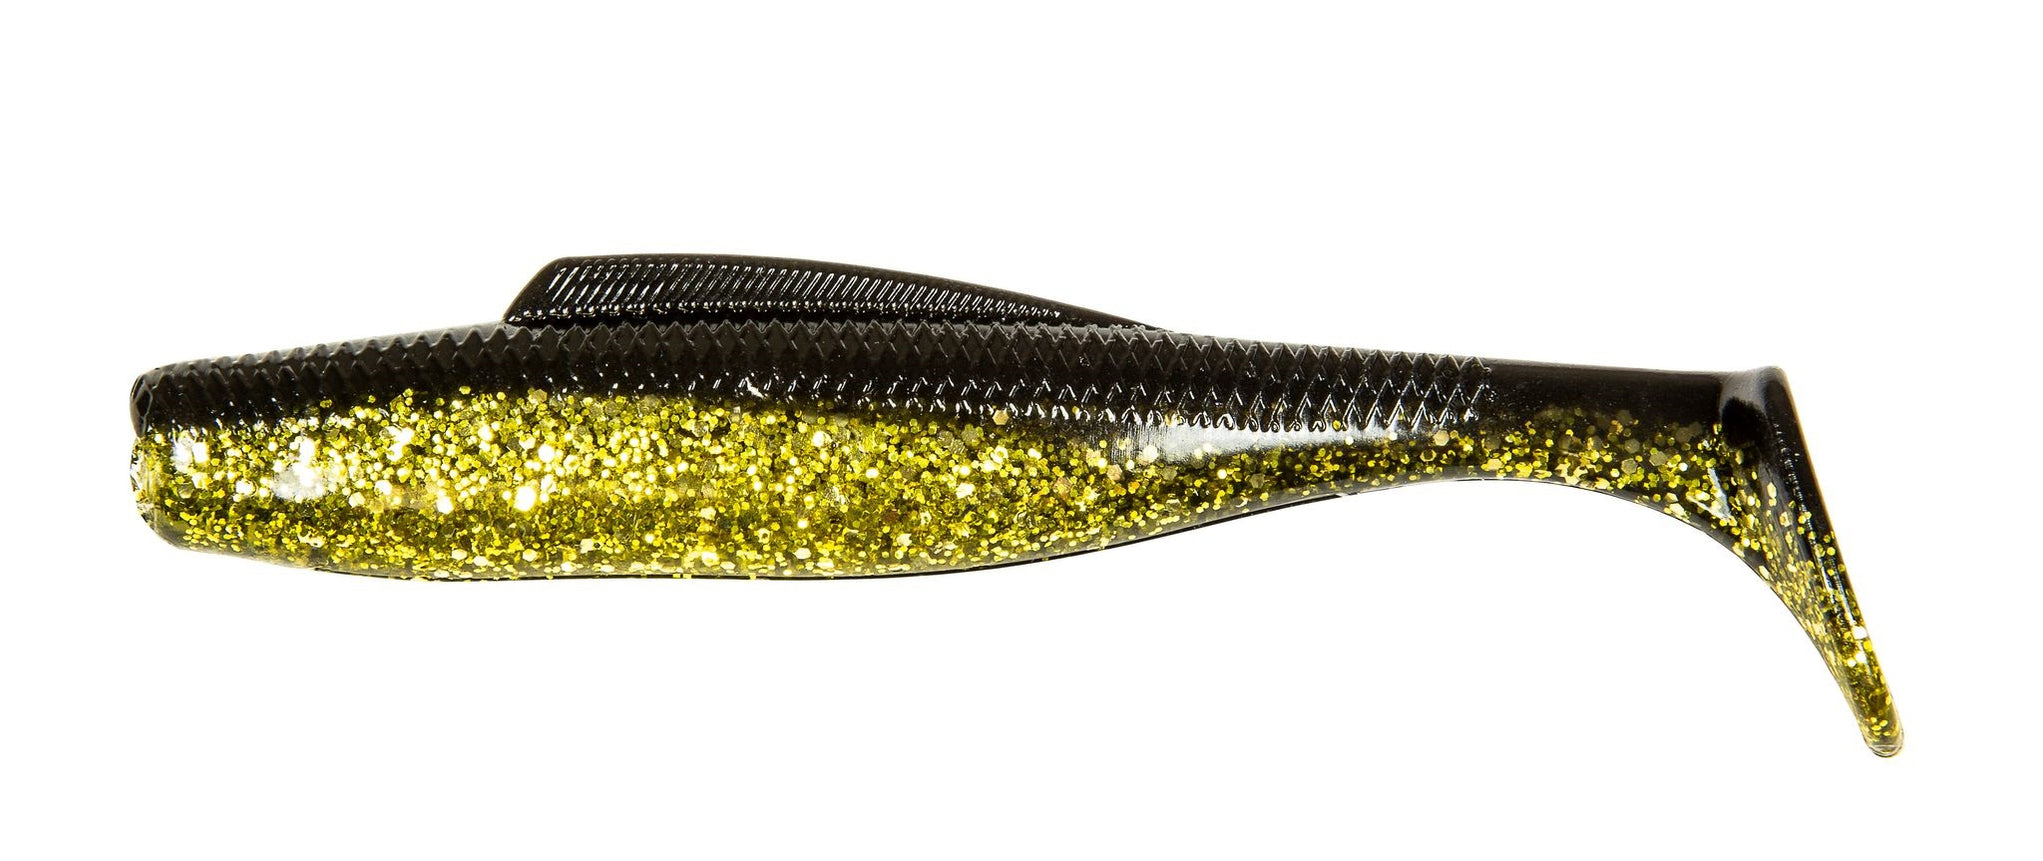 Z Man Diezel Minnowz 4 Inch Soft Paddle Tail Swimbait 5 Pack — Discount Tackle 